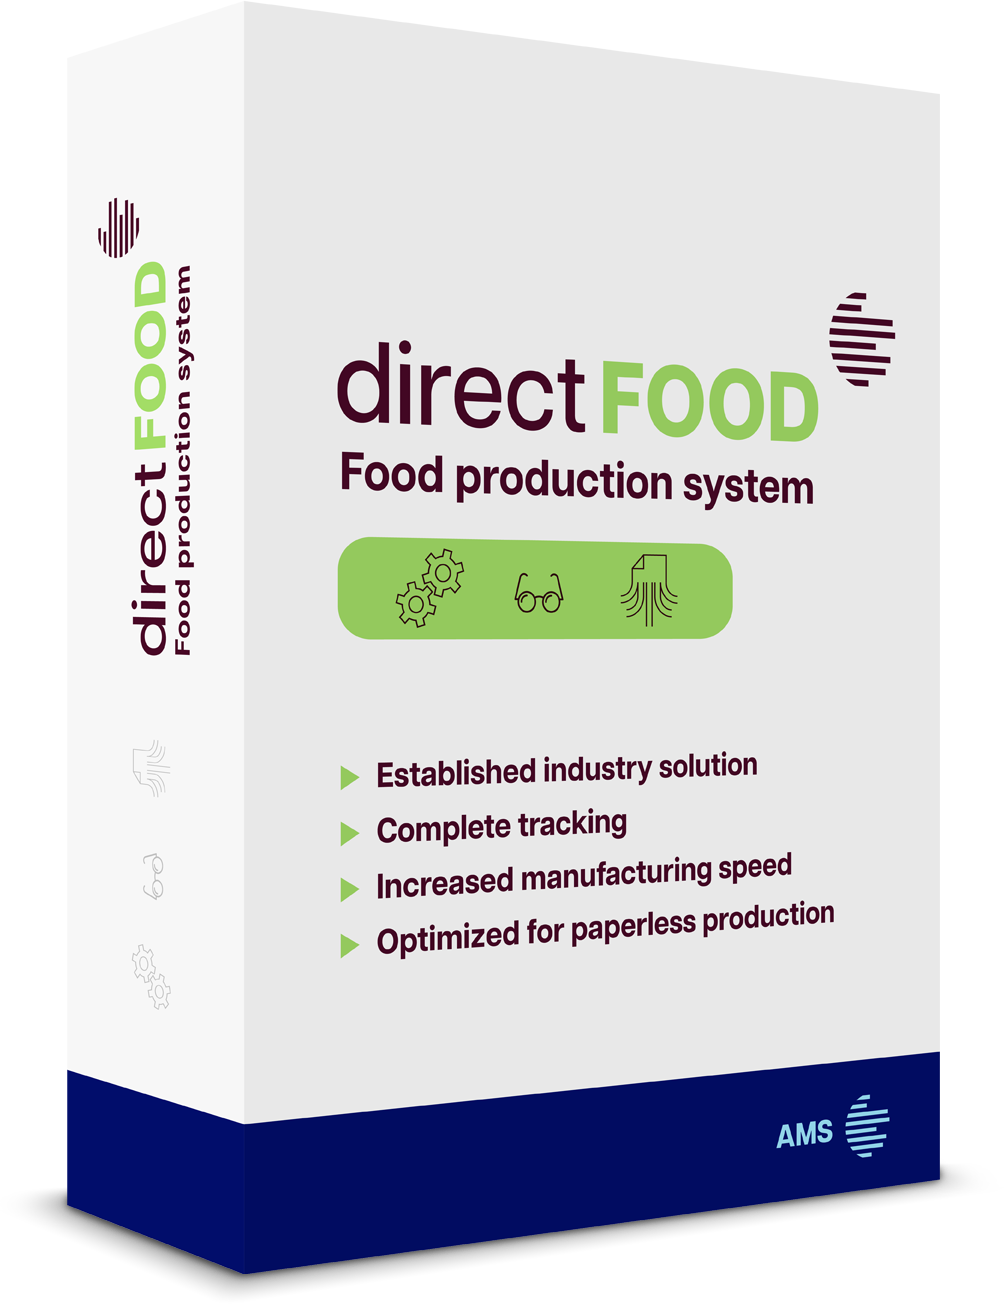 direct FOOD is a modern industry solution for production companies within the food industry, offering complete traceability from receipt of goods to finished products. Producing food safely and securely is the most important value you, as a producer, can guarantee through a sound food production system.